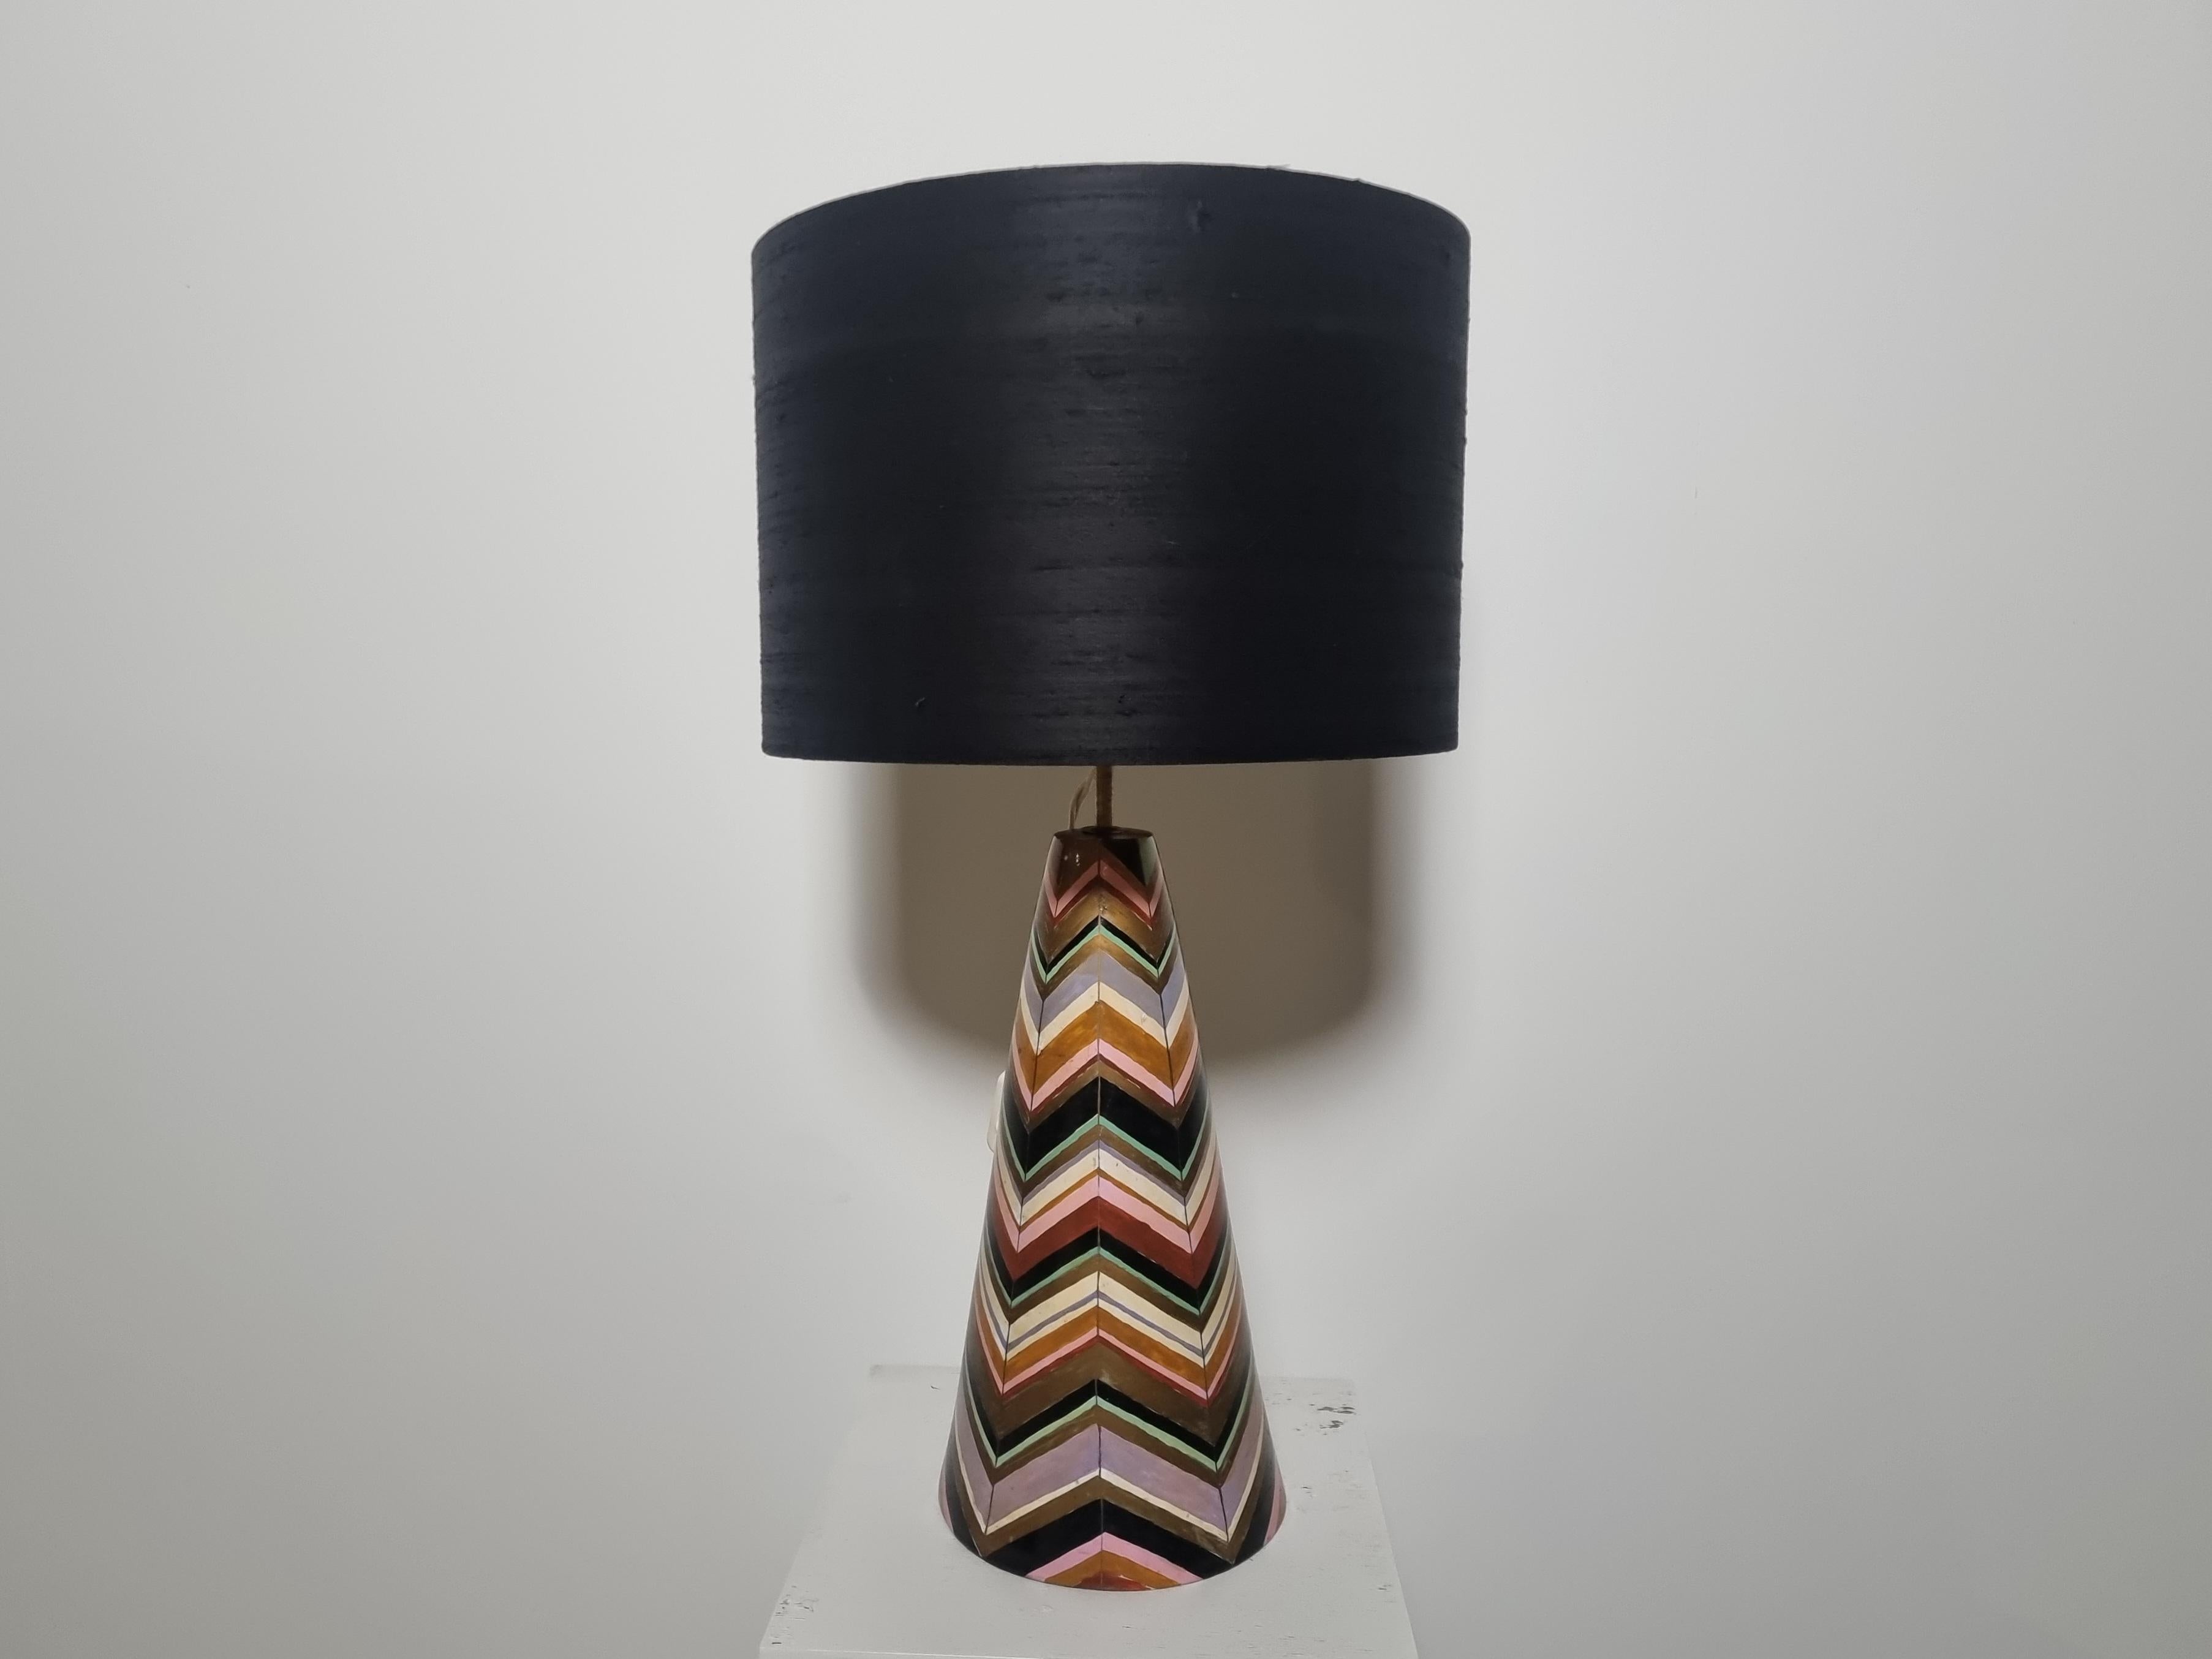 Ceramic lamp in multi-colored handpainted lacquer decoration, the lampshade in black and gold interior is handmade from interior fabric, Italy, 1970s.